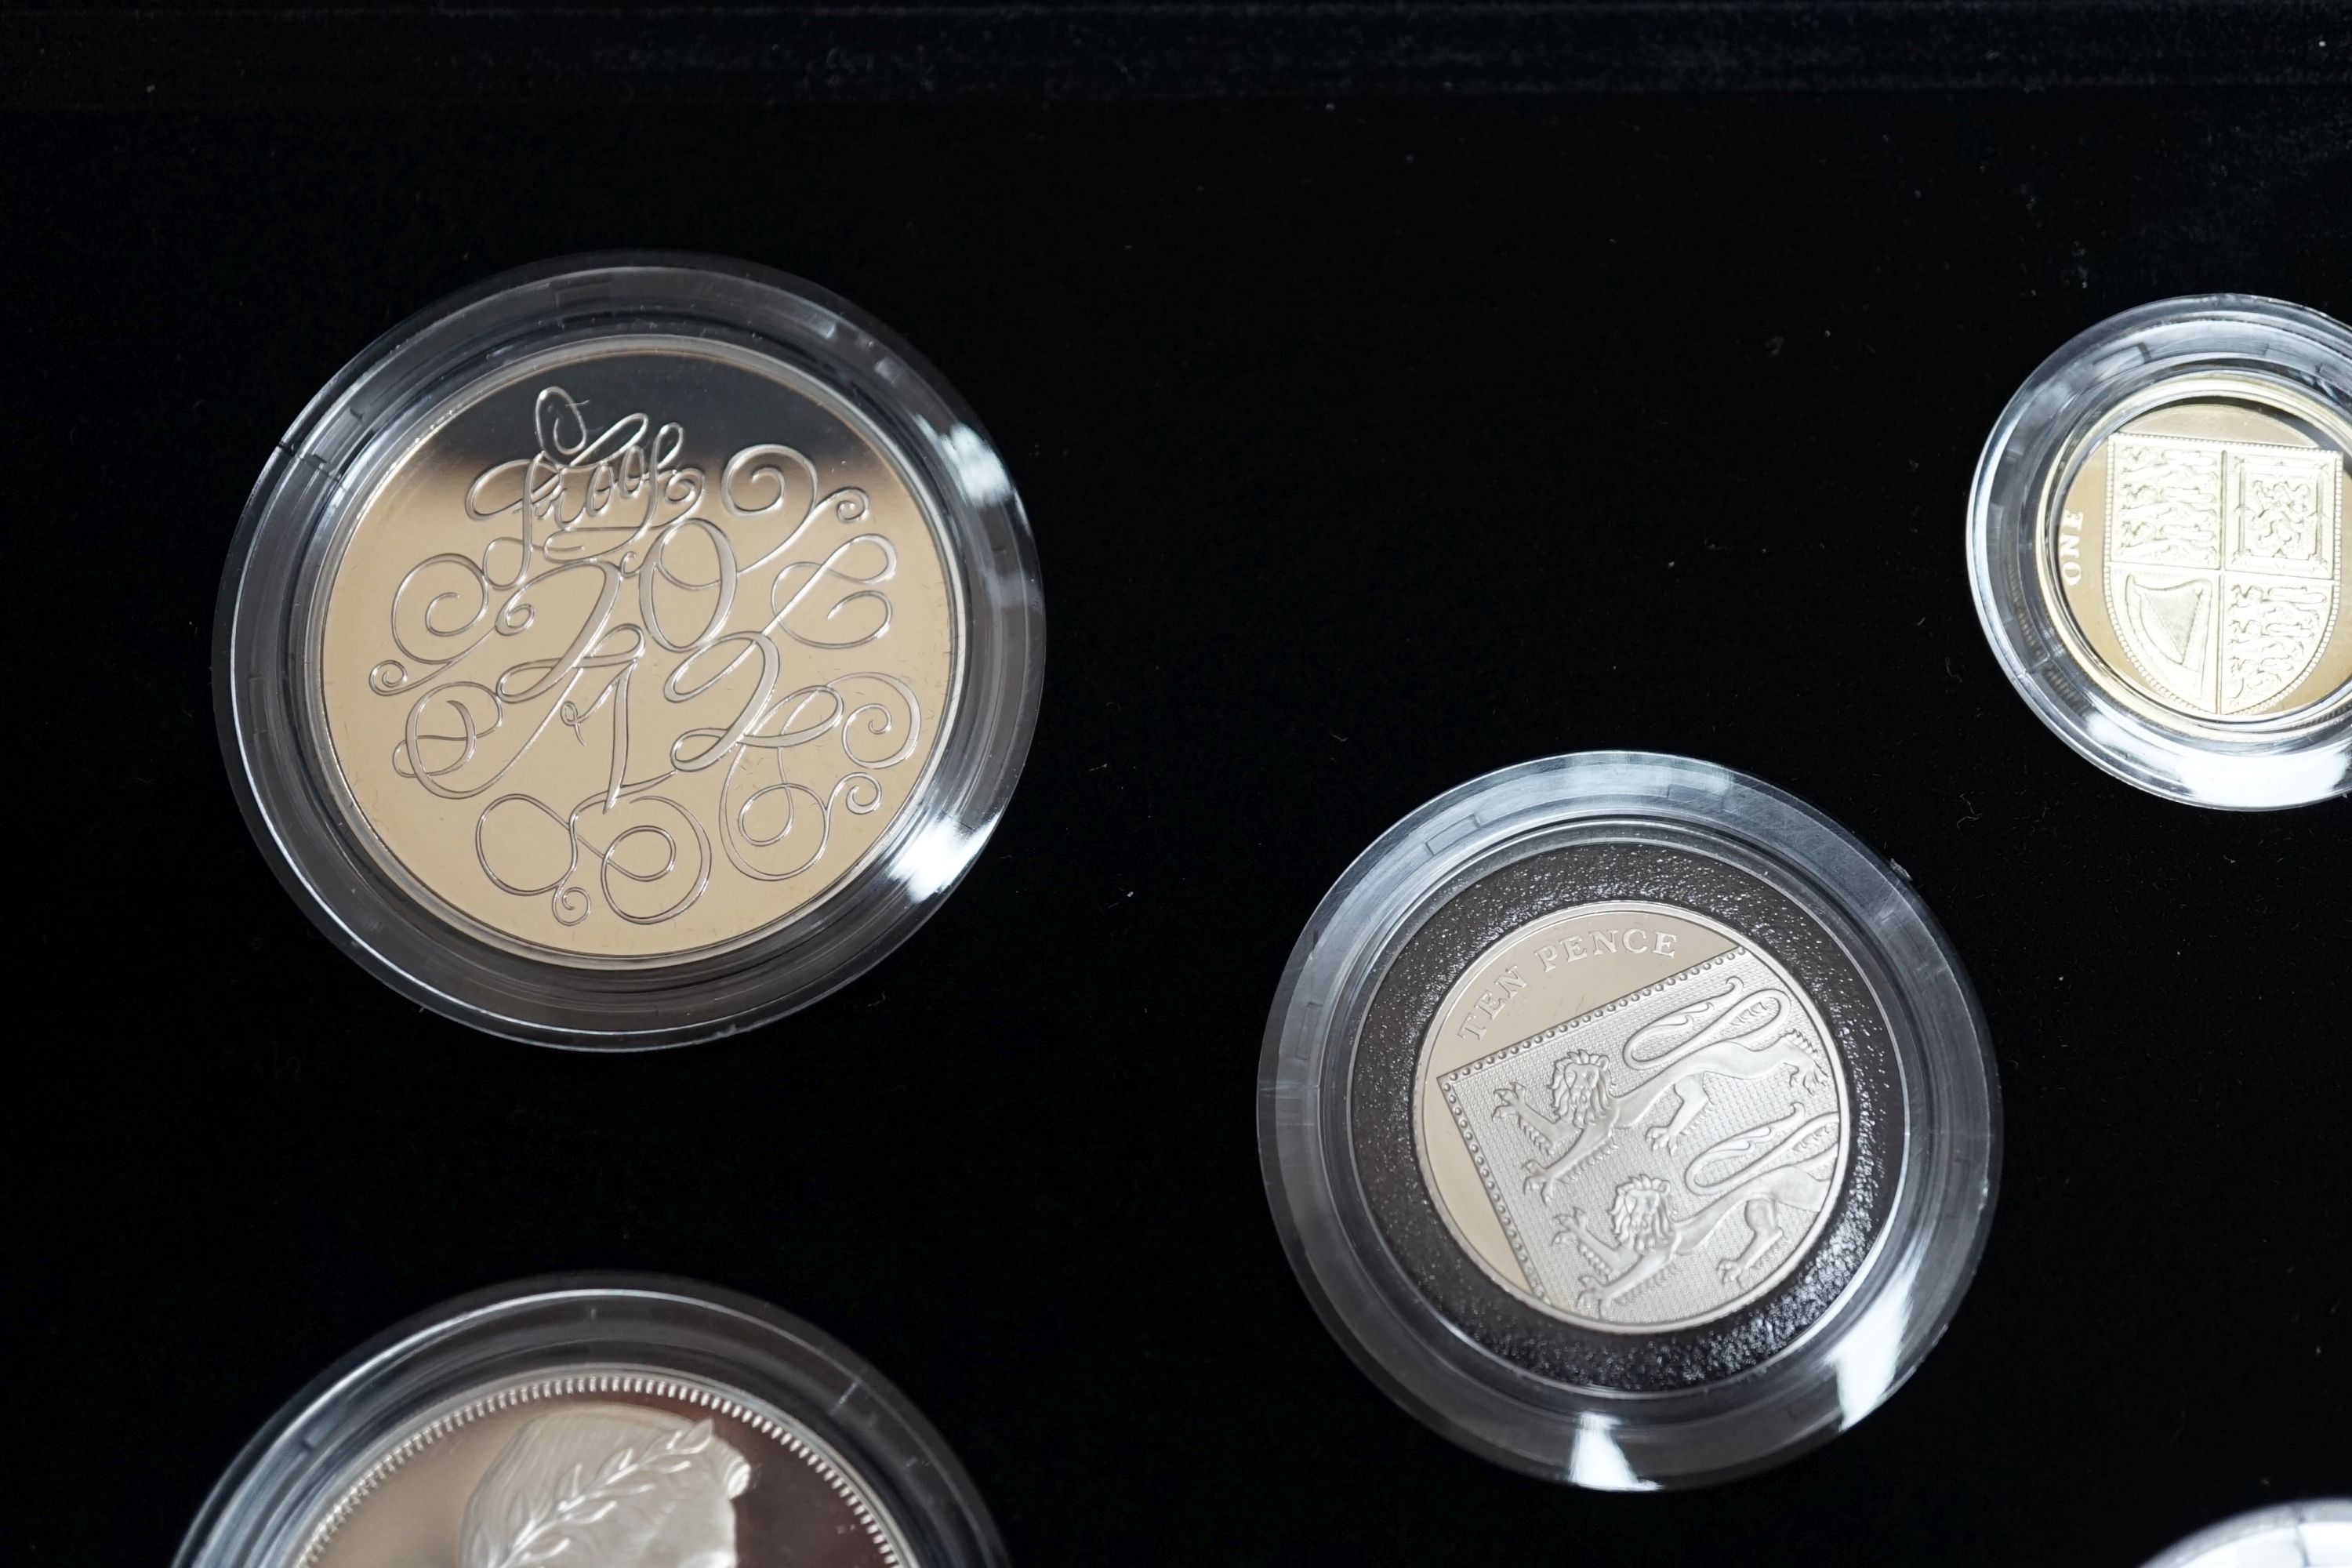 A 2012 UK premium proof coin collection